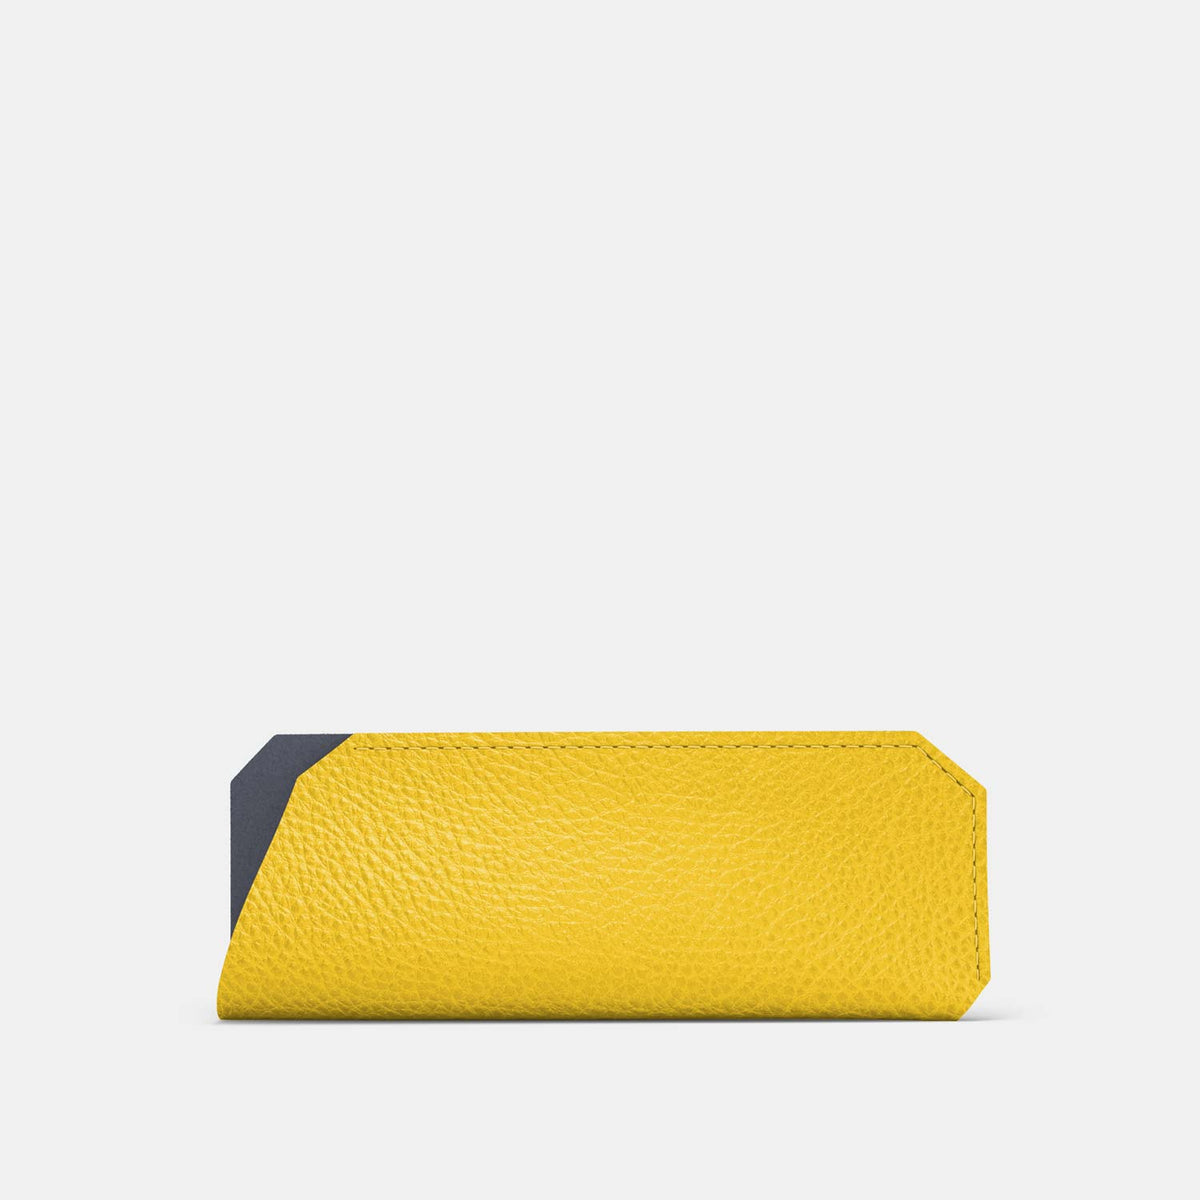 Leather Glasses case - Yellow and Grey